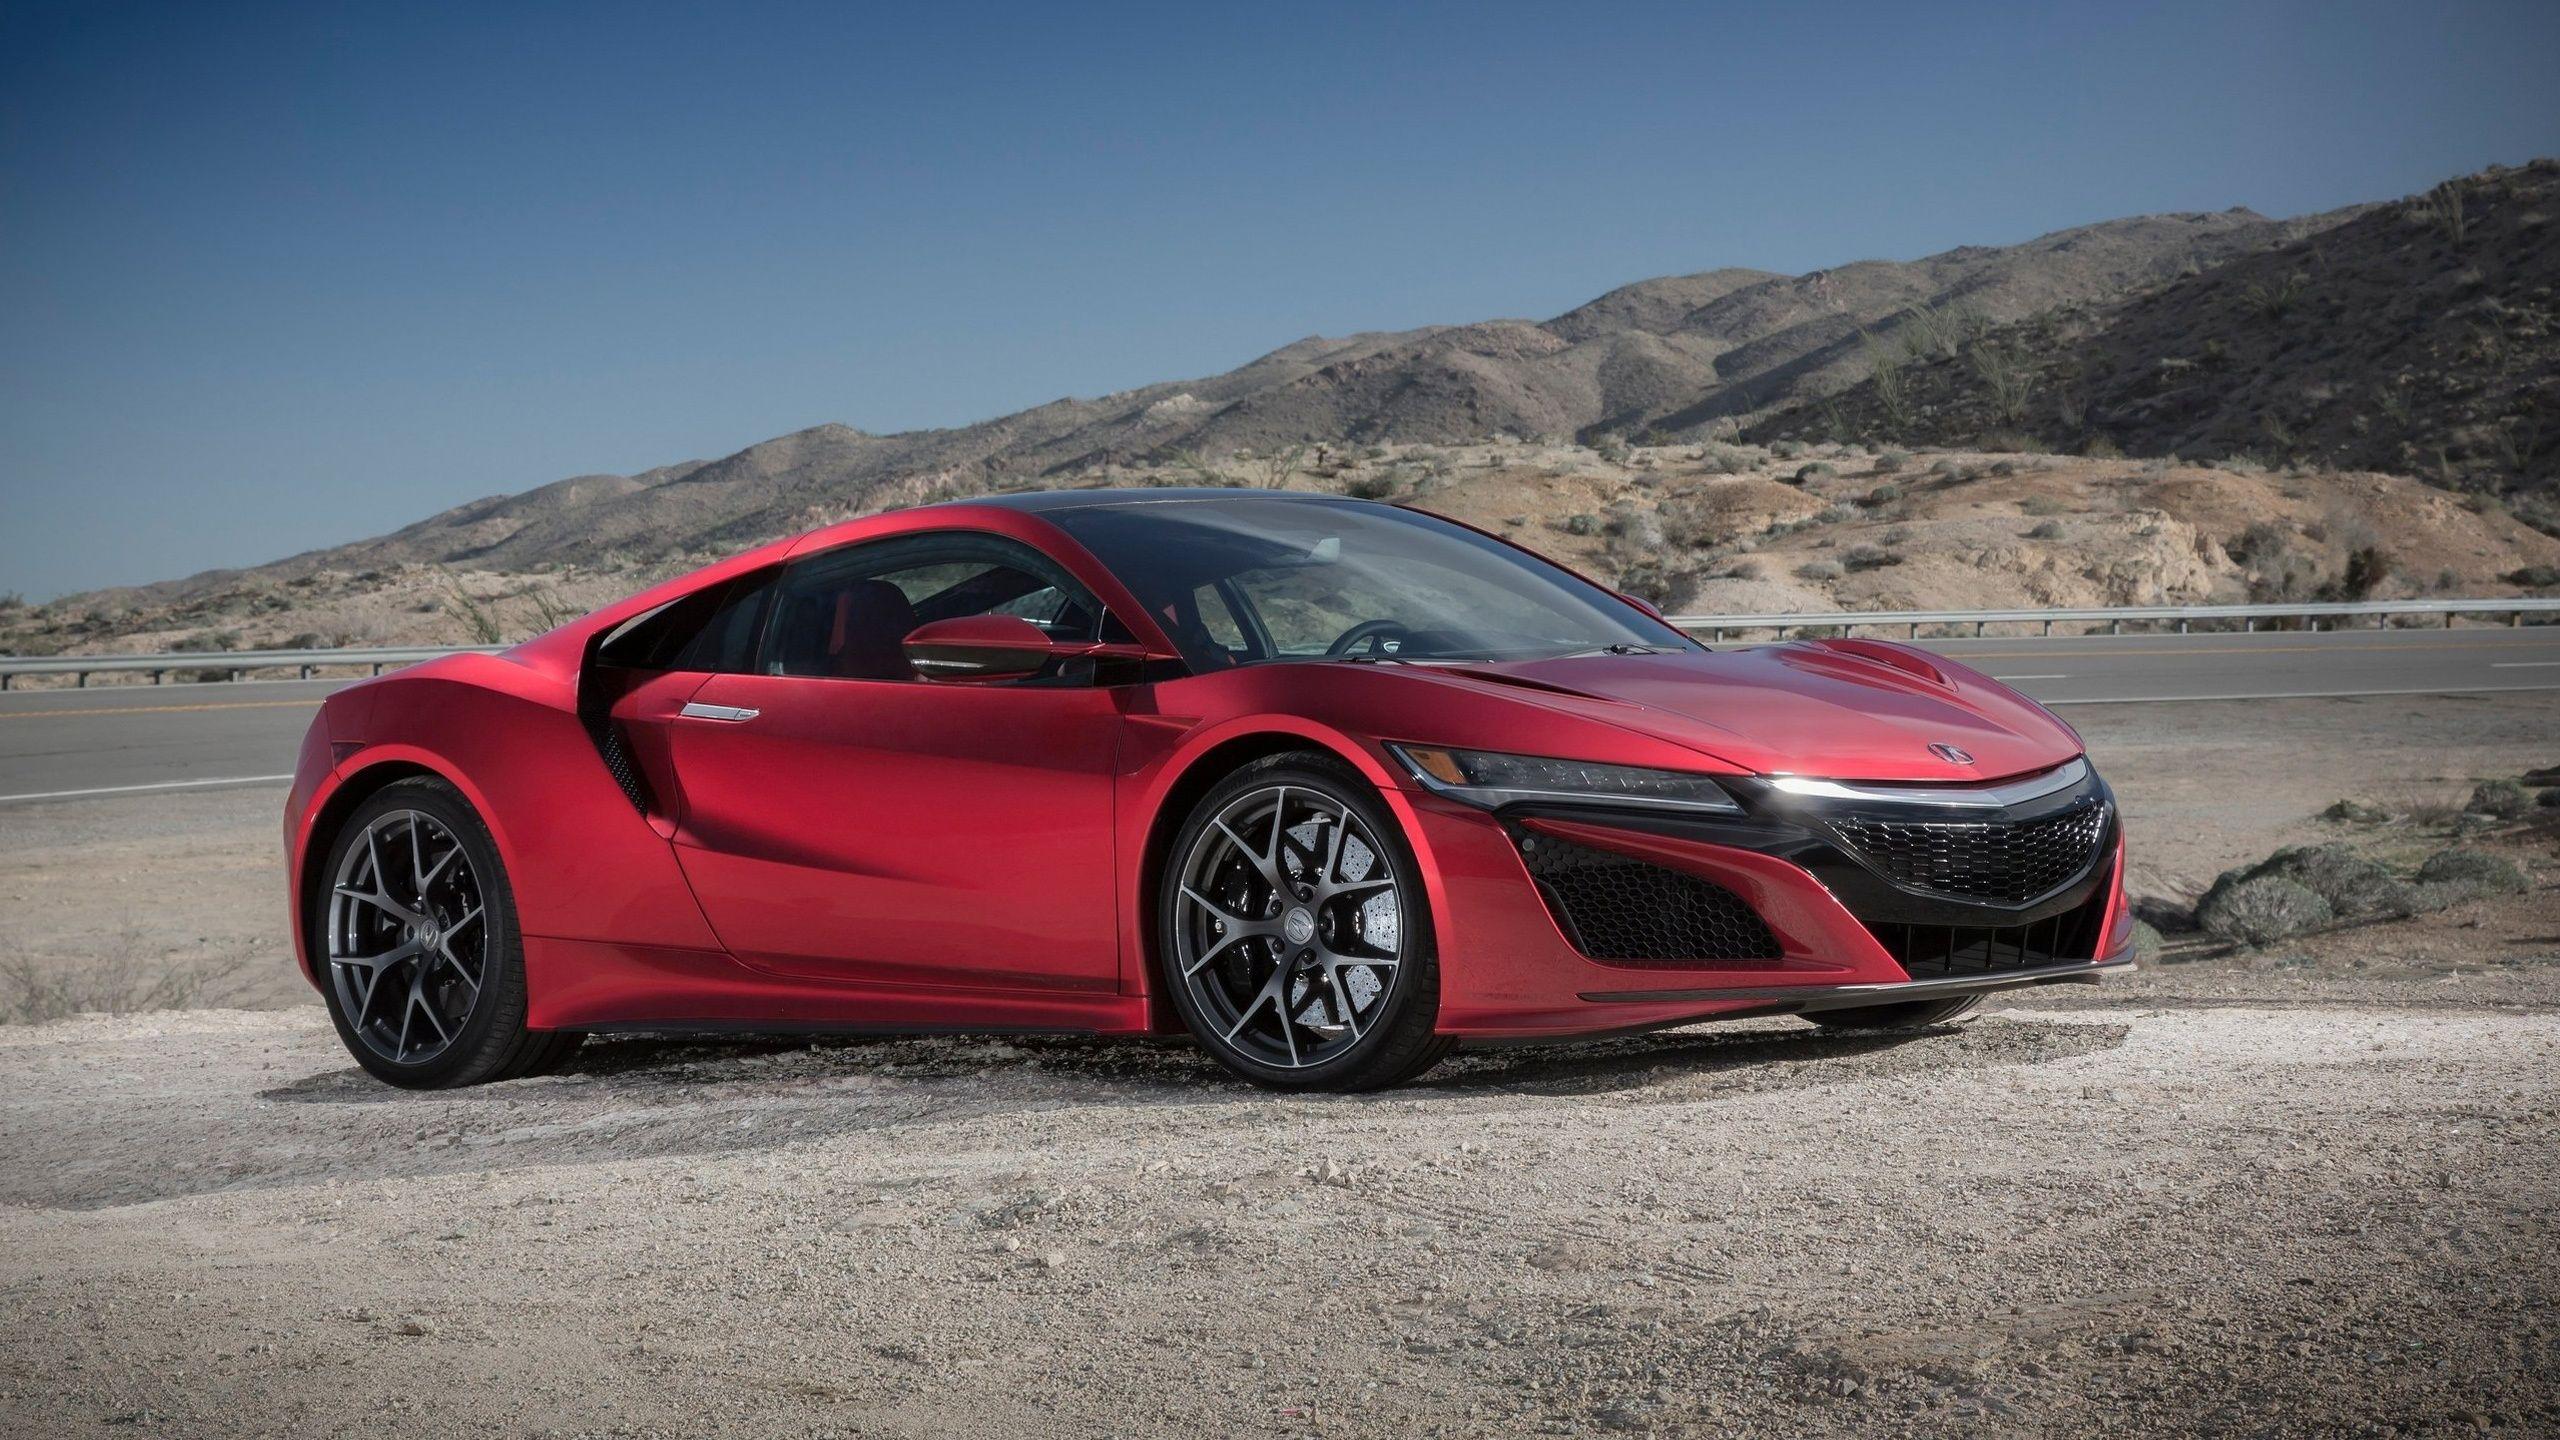 Acura NSX wallpaper by IVANH2R  Download on ZEDGE  ea0d